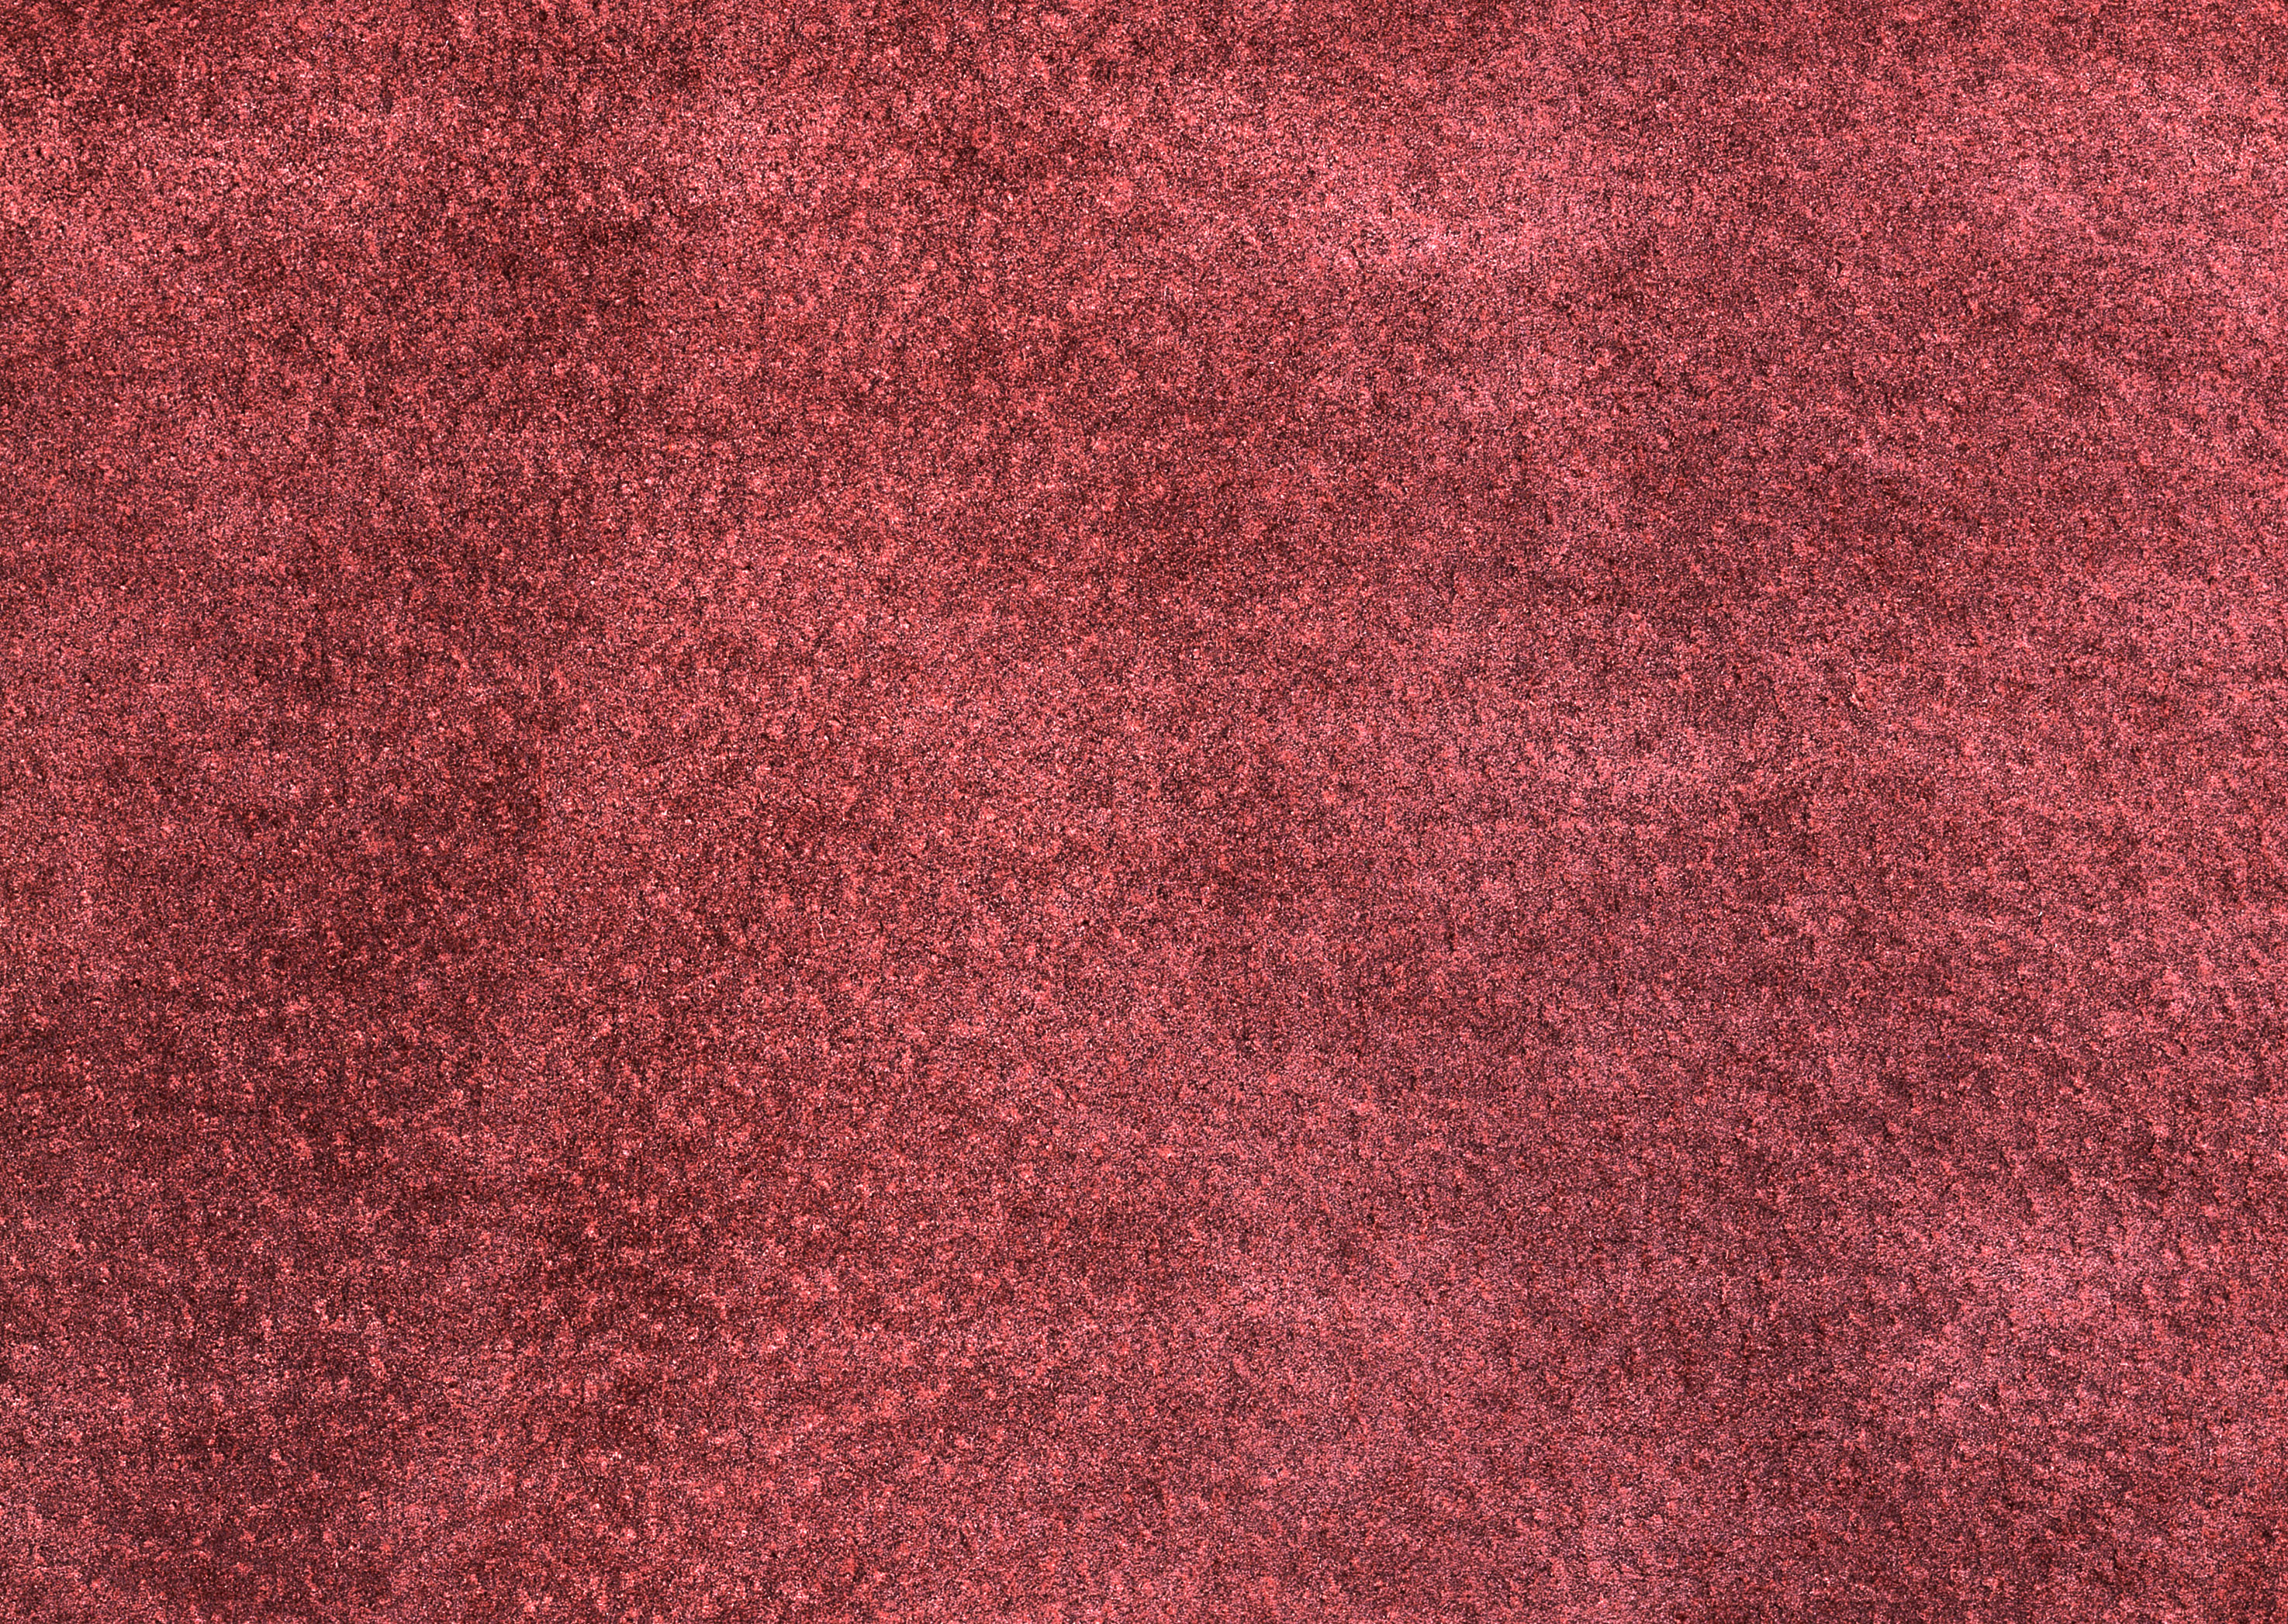 Pink leather big textures background image, free picture leather download